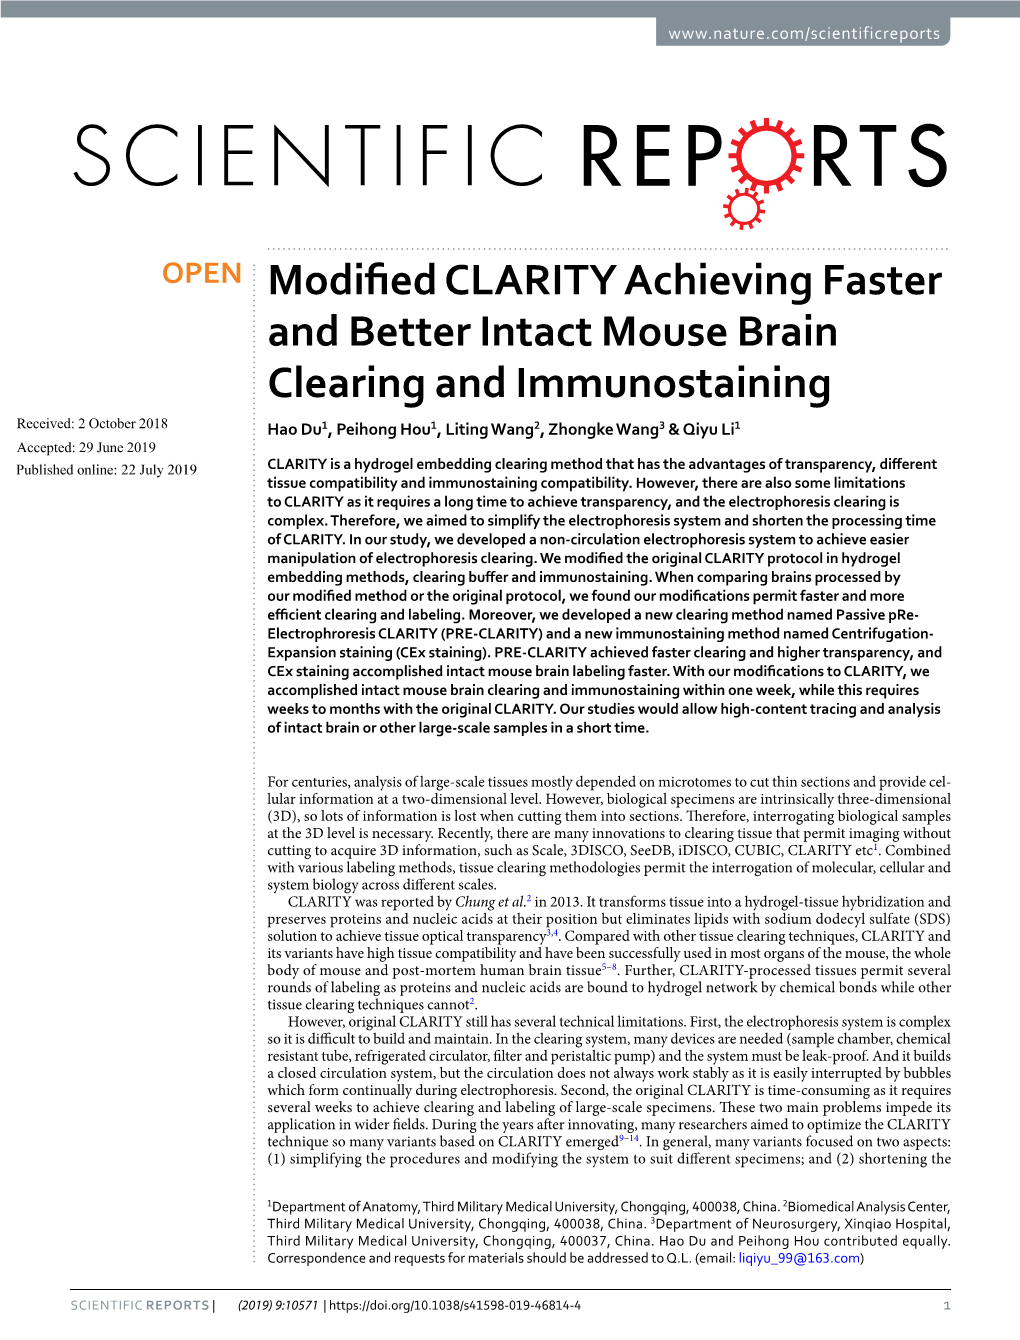 Modified CLARITY Achieving Faster and Better Intact Mouse Brain